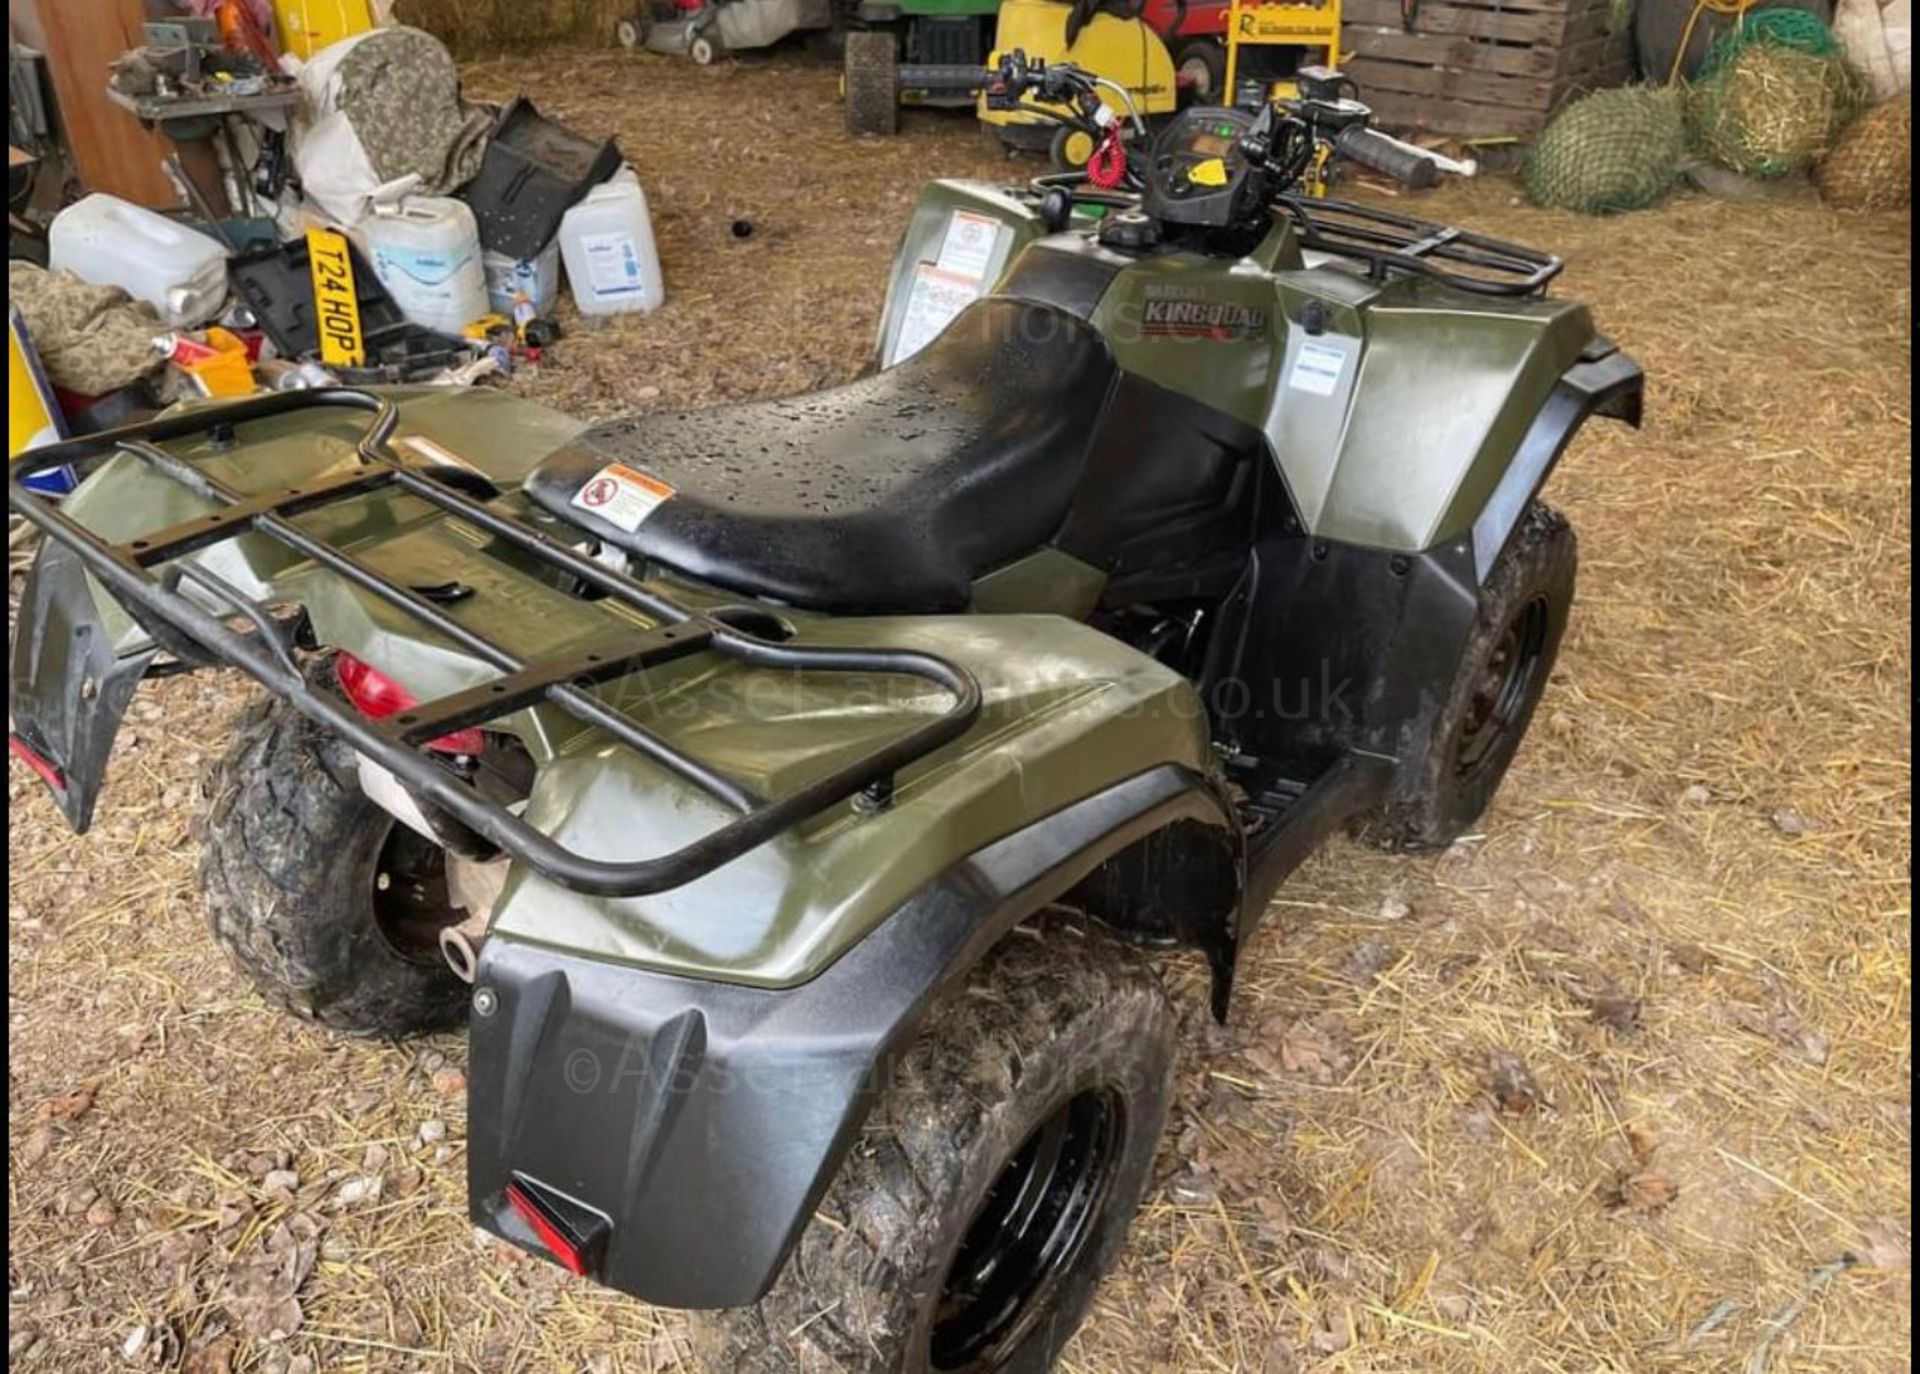 2018 SUZUKI KING QUAD 400 4WD FARM QUAD BIKE, RUNS AND DRIVES WELL, SHOWING A LOW 680 HOURS - Image 5 of 7